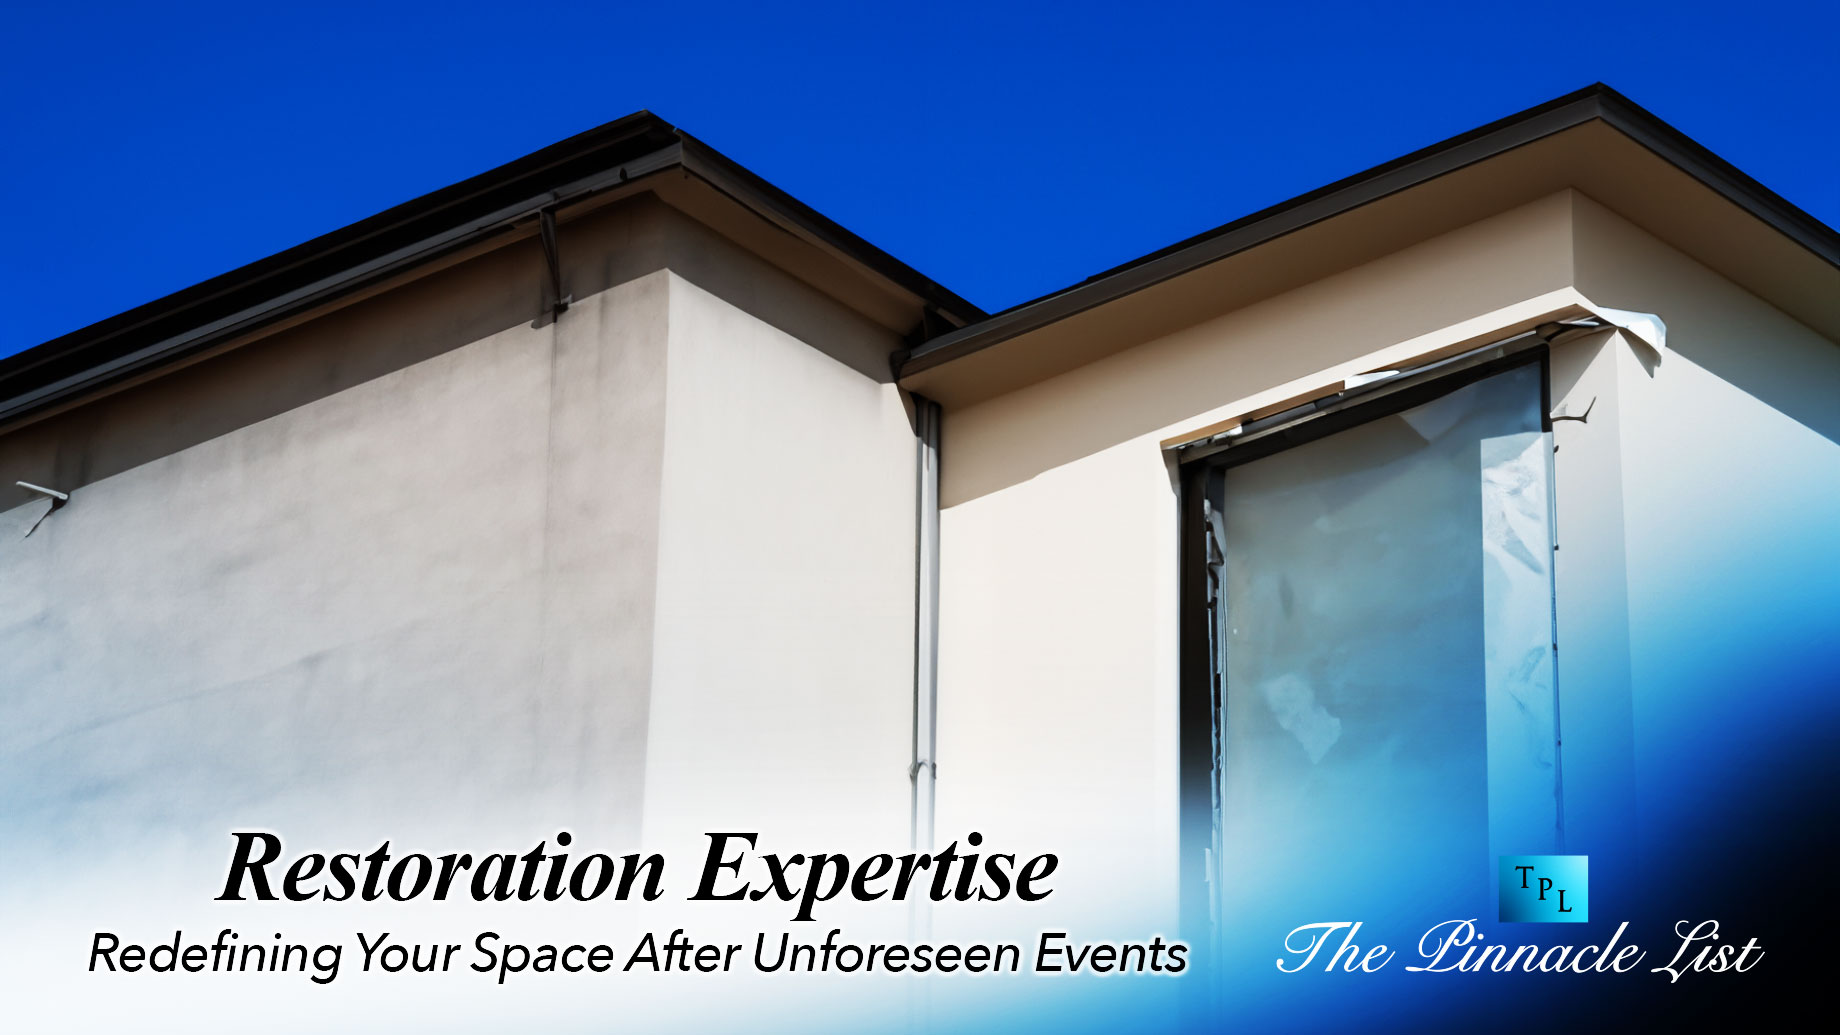 Restoration Expertise: Redefining Your Space After Unforeseen Events